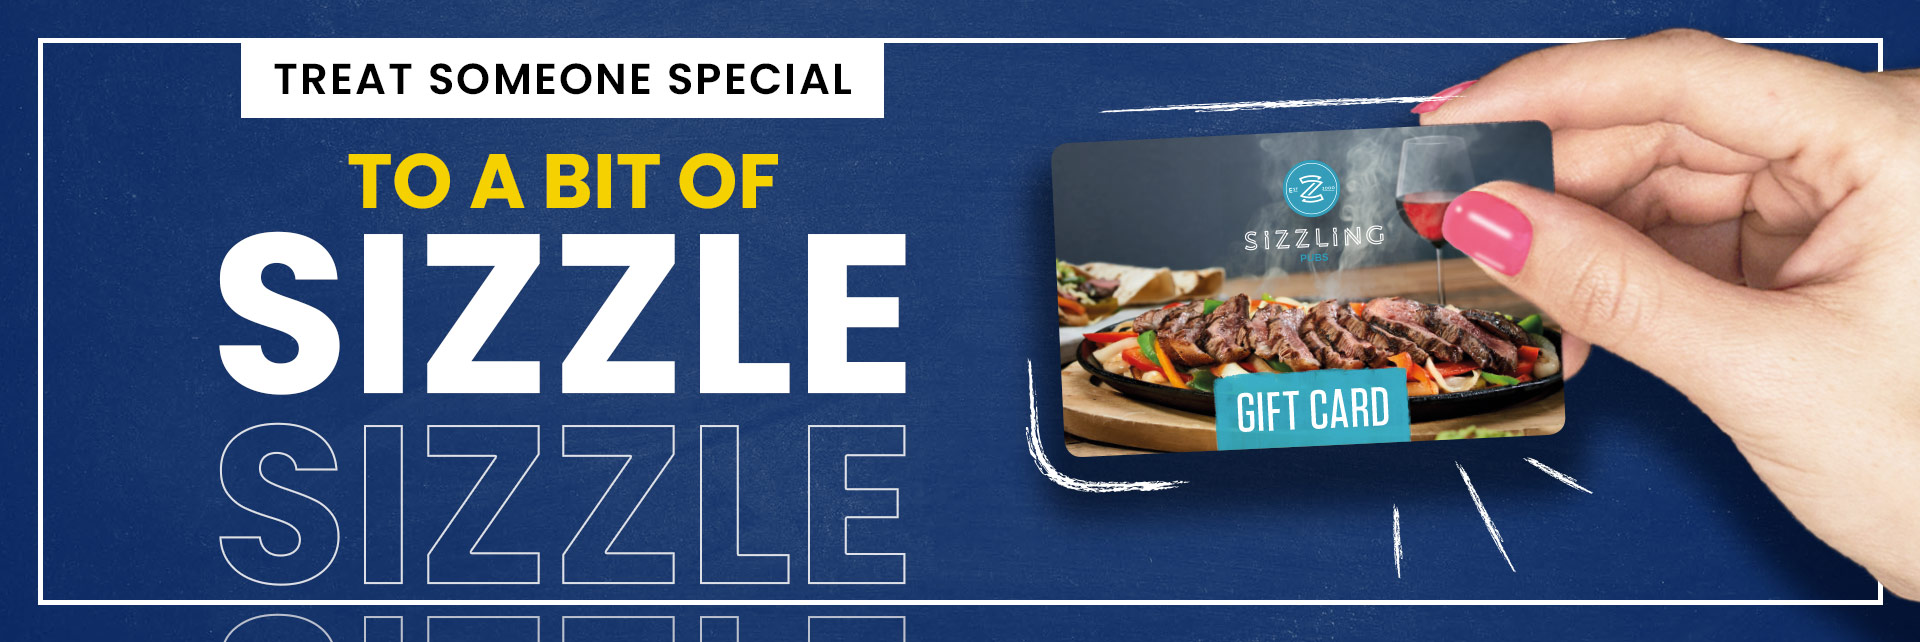 Sizzling Pubs Gift Card at The Powder Monkey in Wallsend